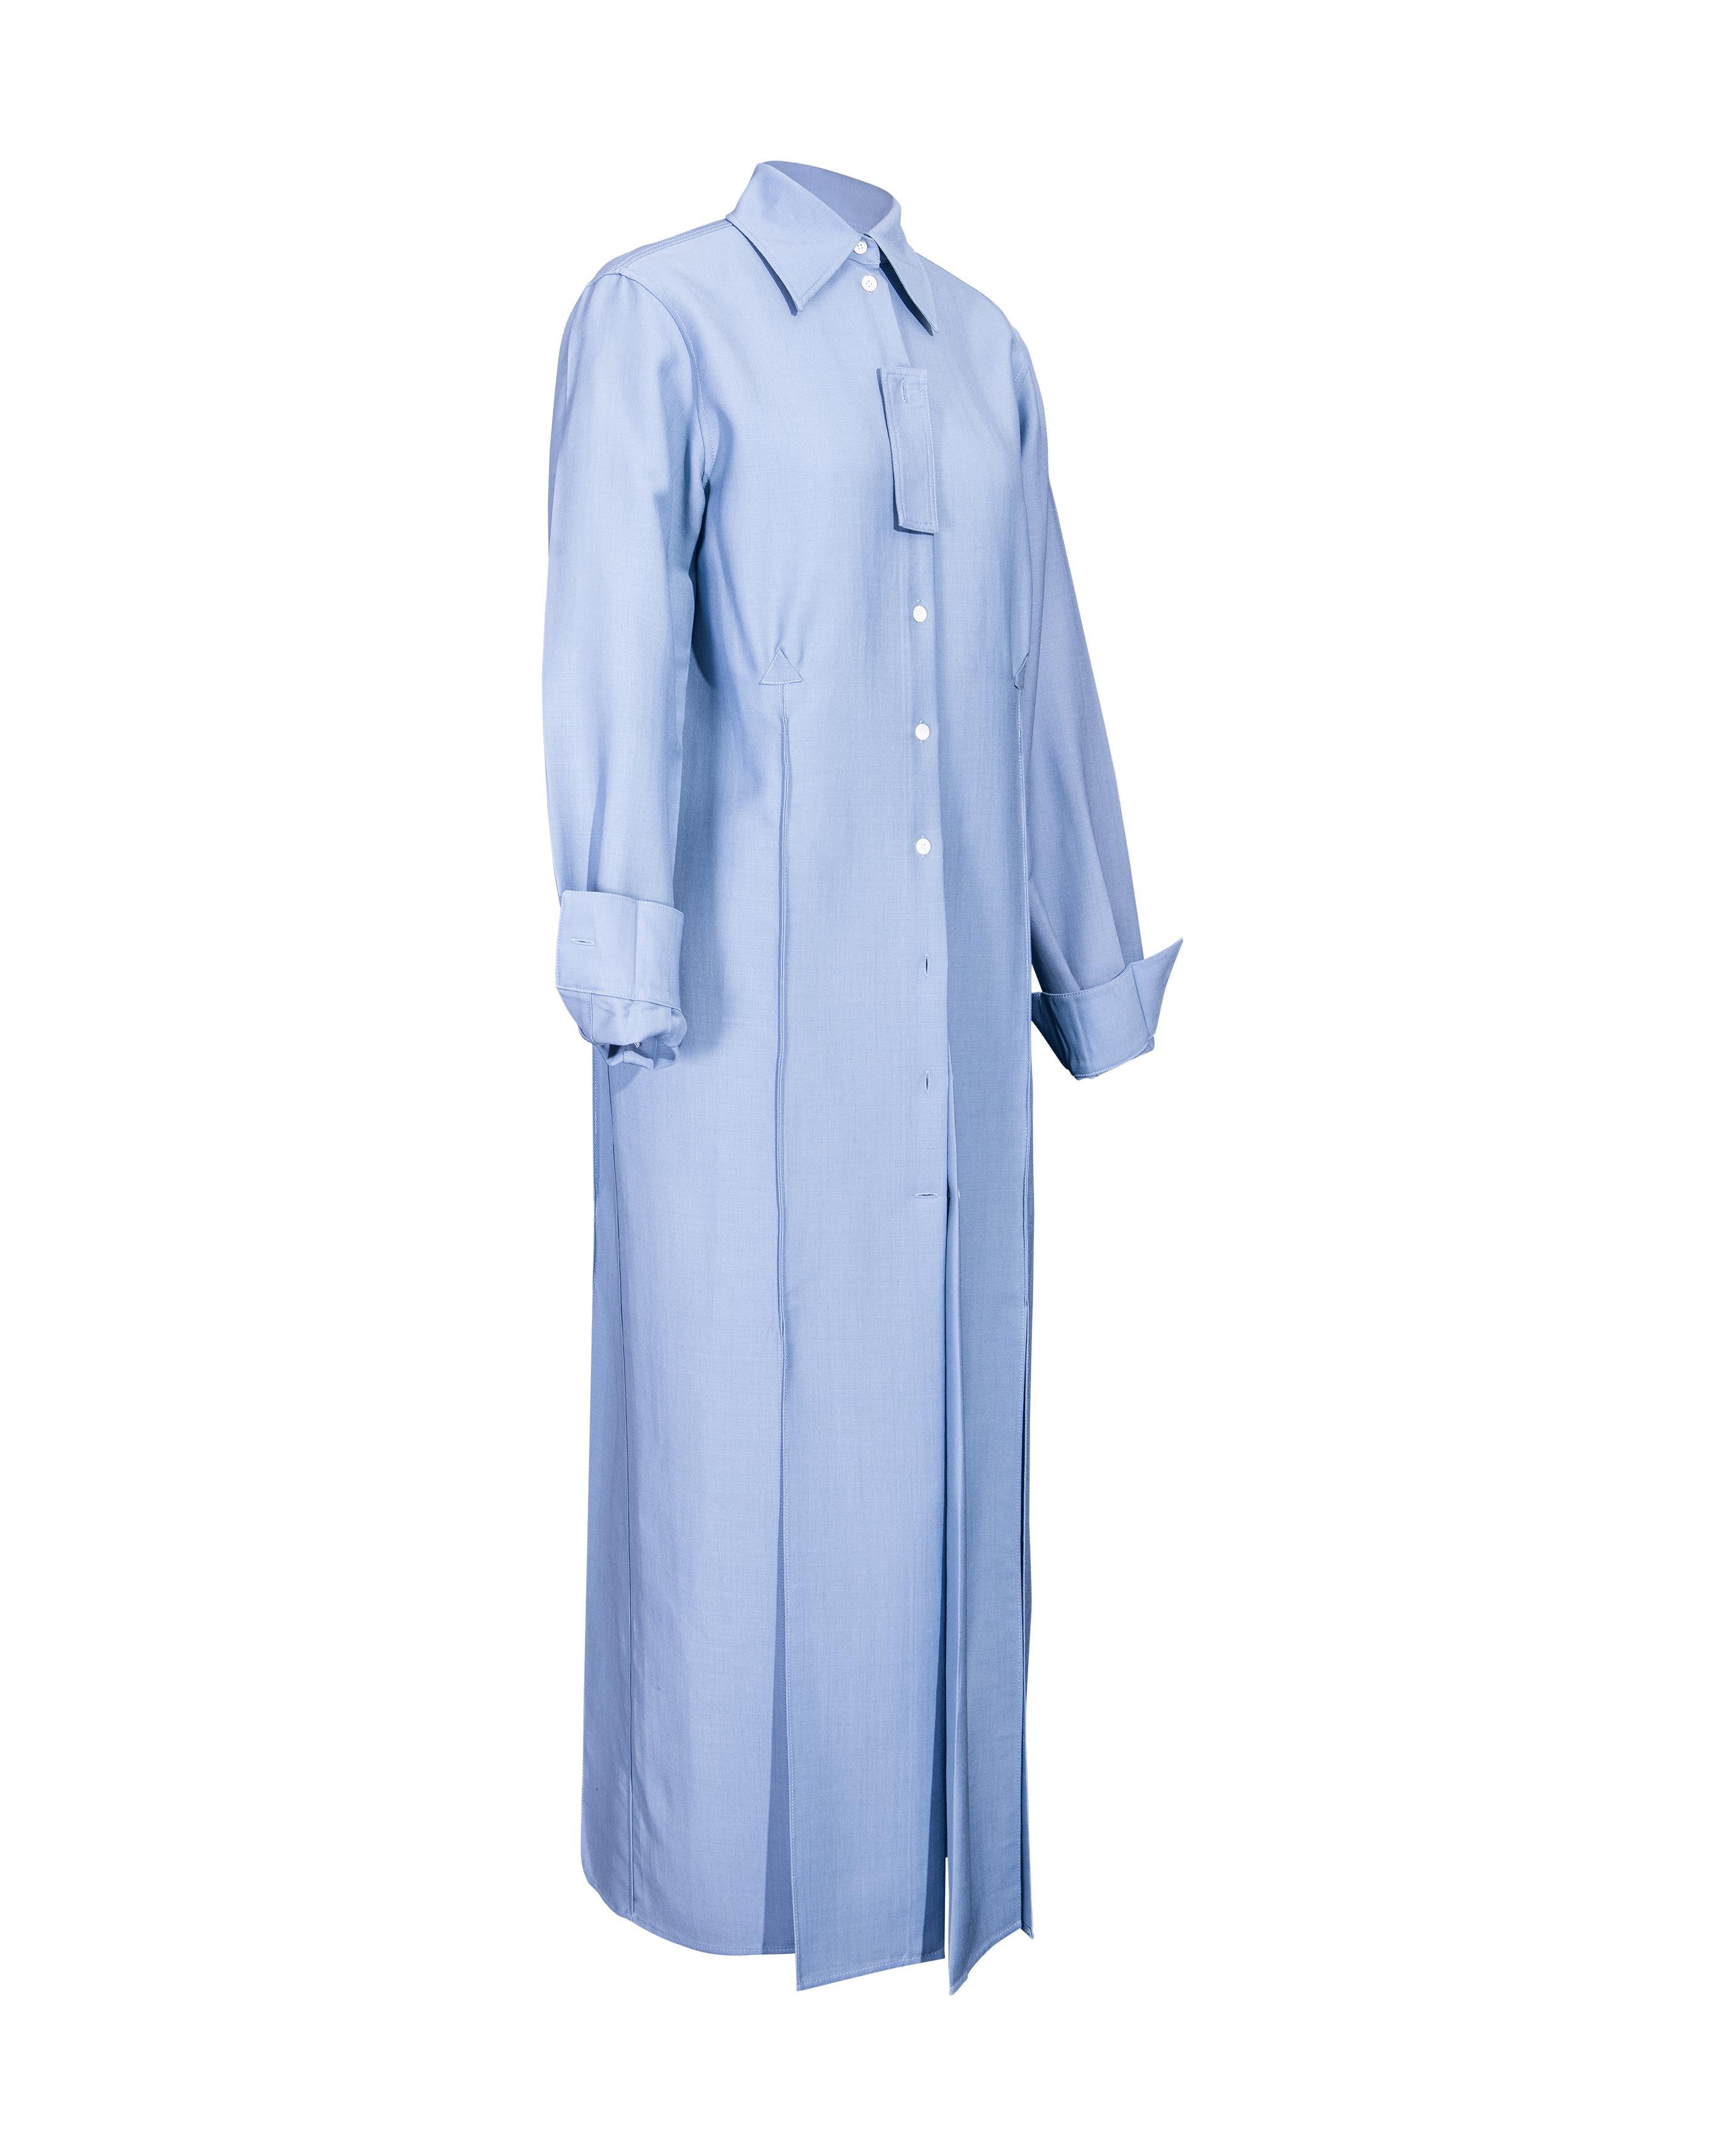 A/W 2017 Céline by Phoebe Philo Button-Up Light Blue Shirt Dress In Excellent Condition In North Hollywood, CA